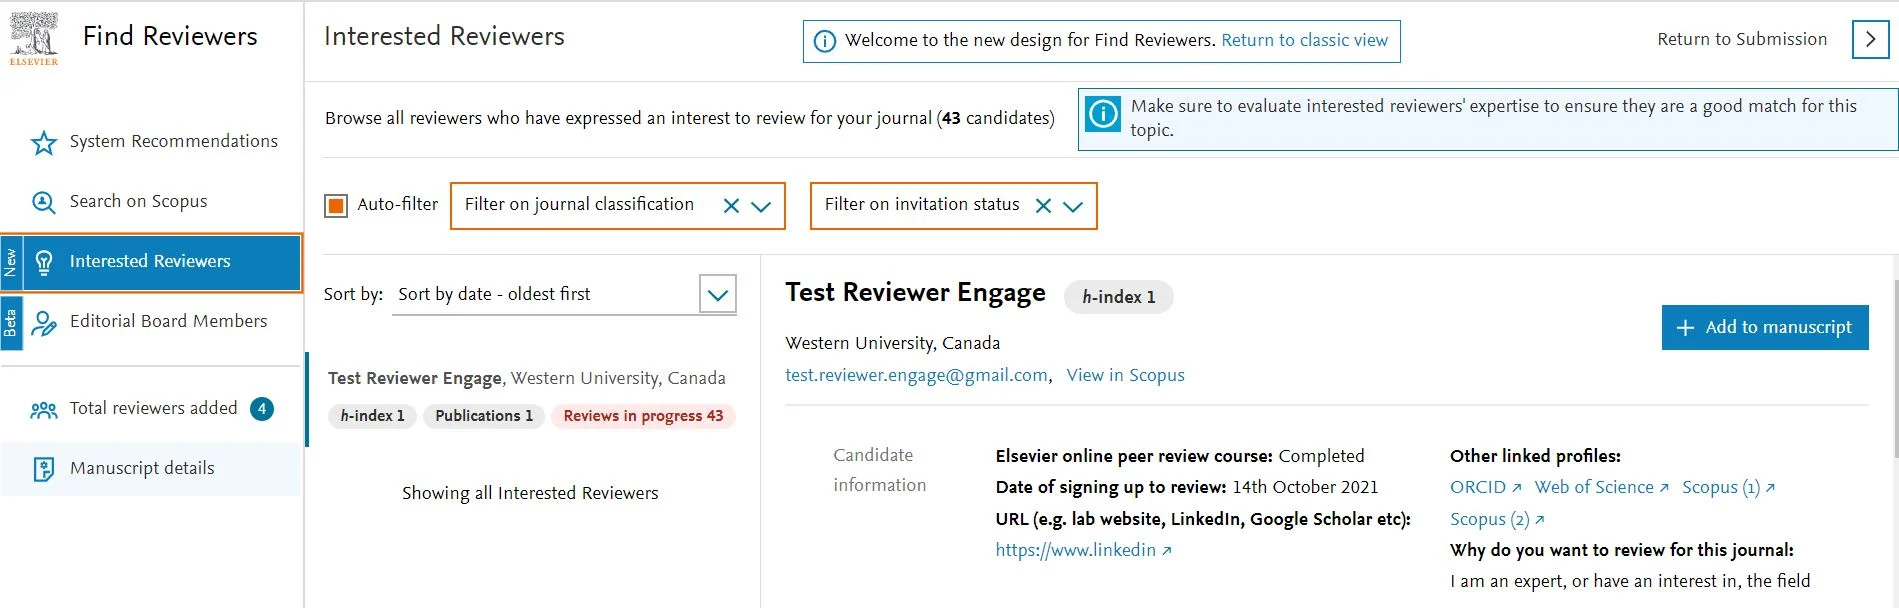 Interested Reviewers screen in Editorial Manager